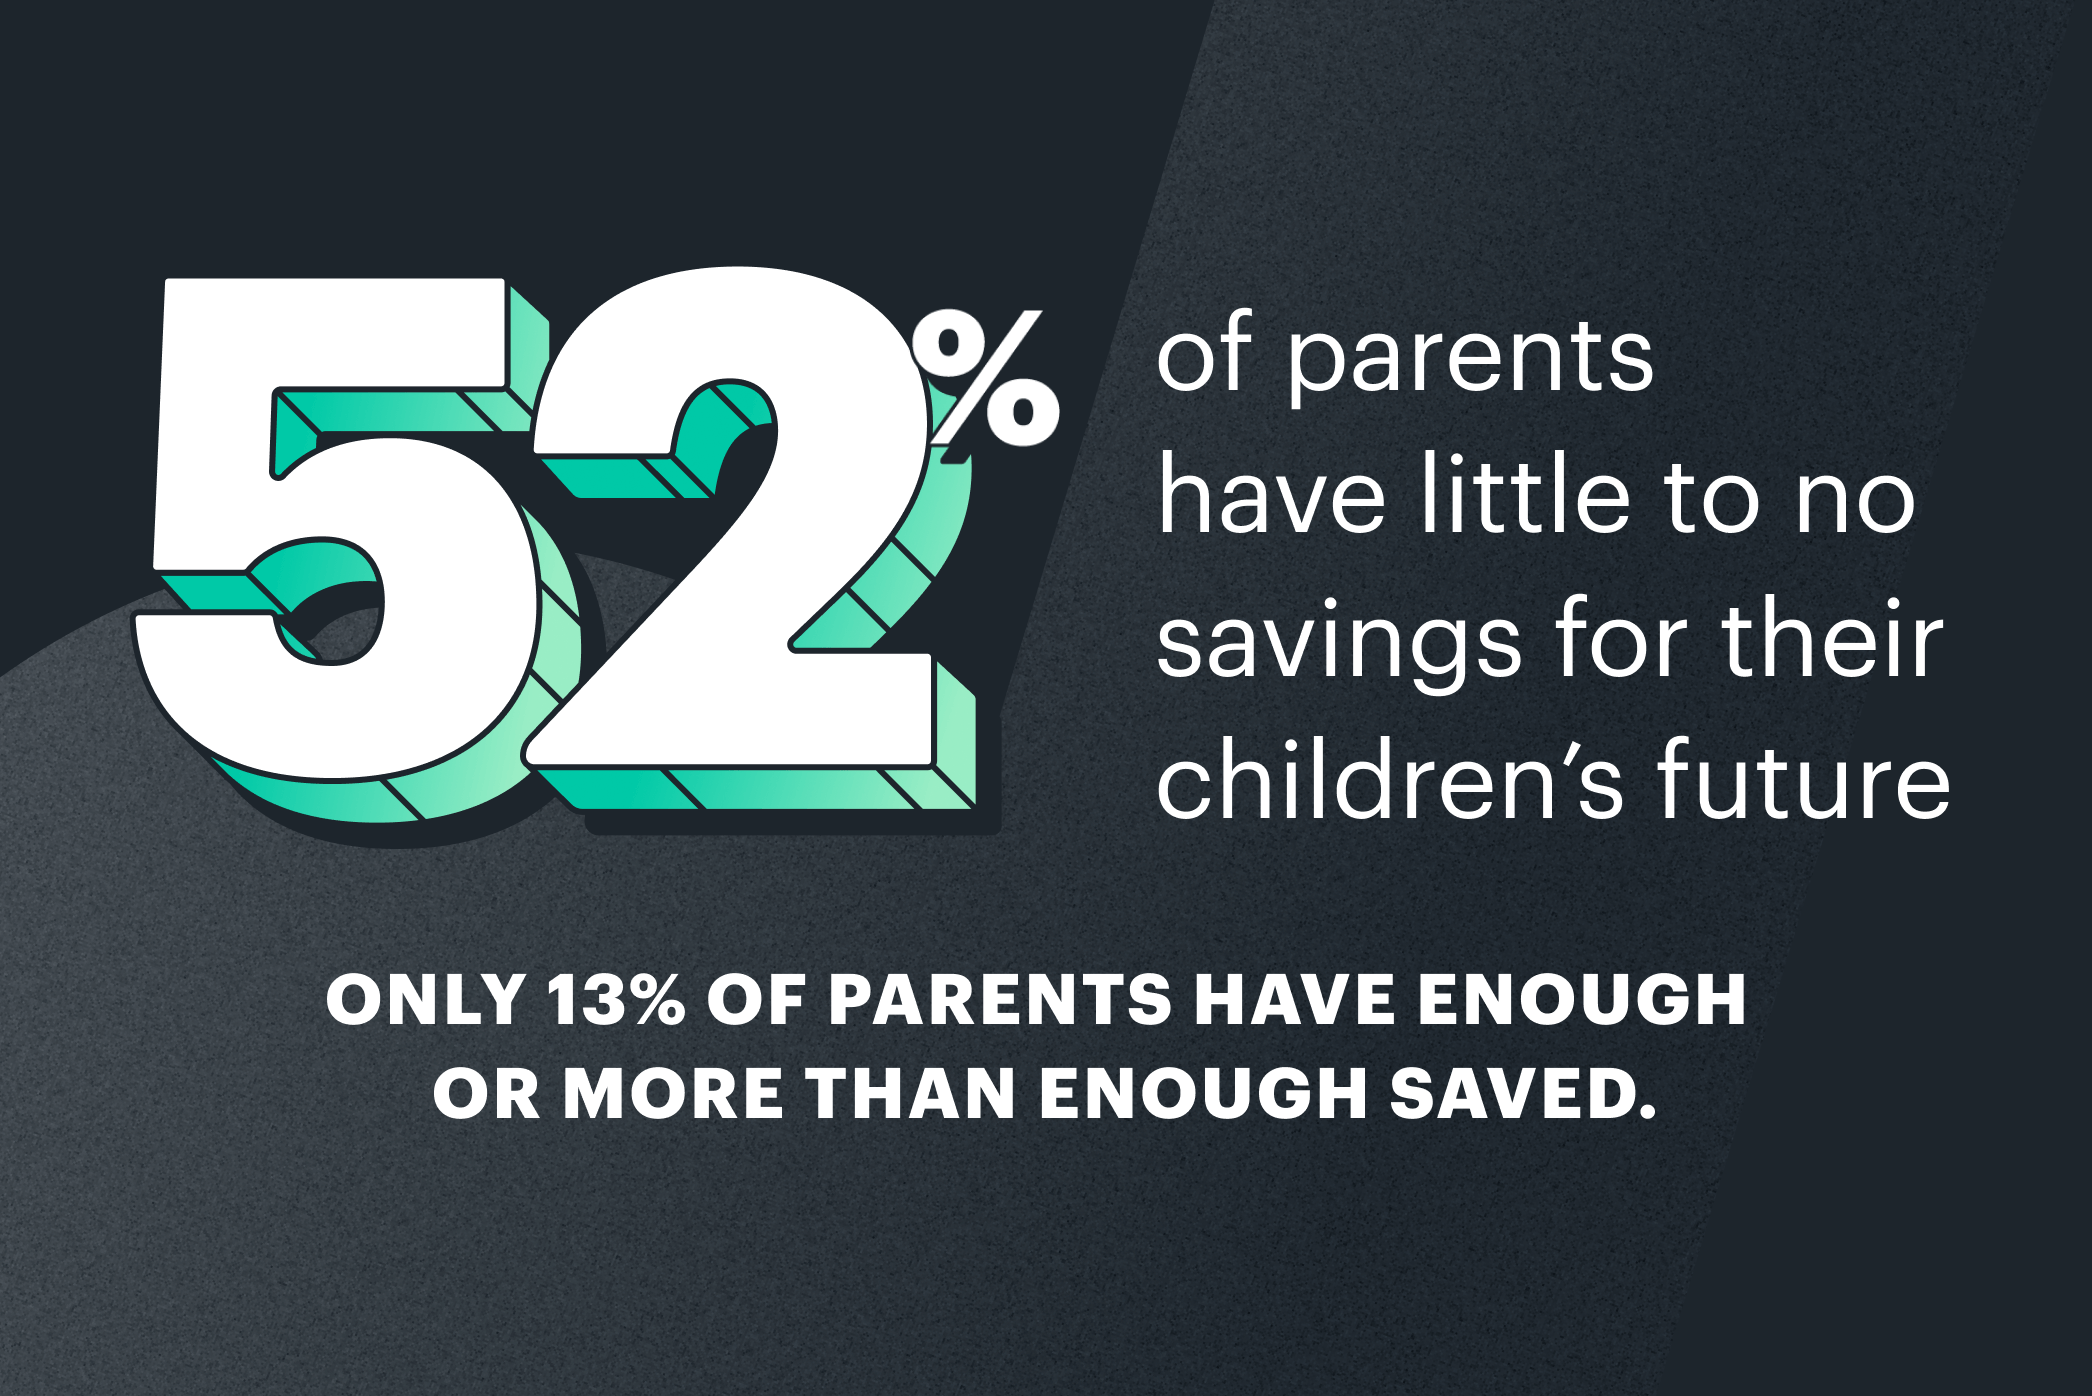 Statistic: 52% have little to no savings for their children’s future; only 13% have enough or more than enough saved.
